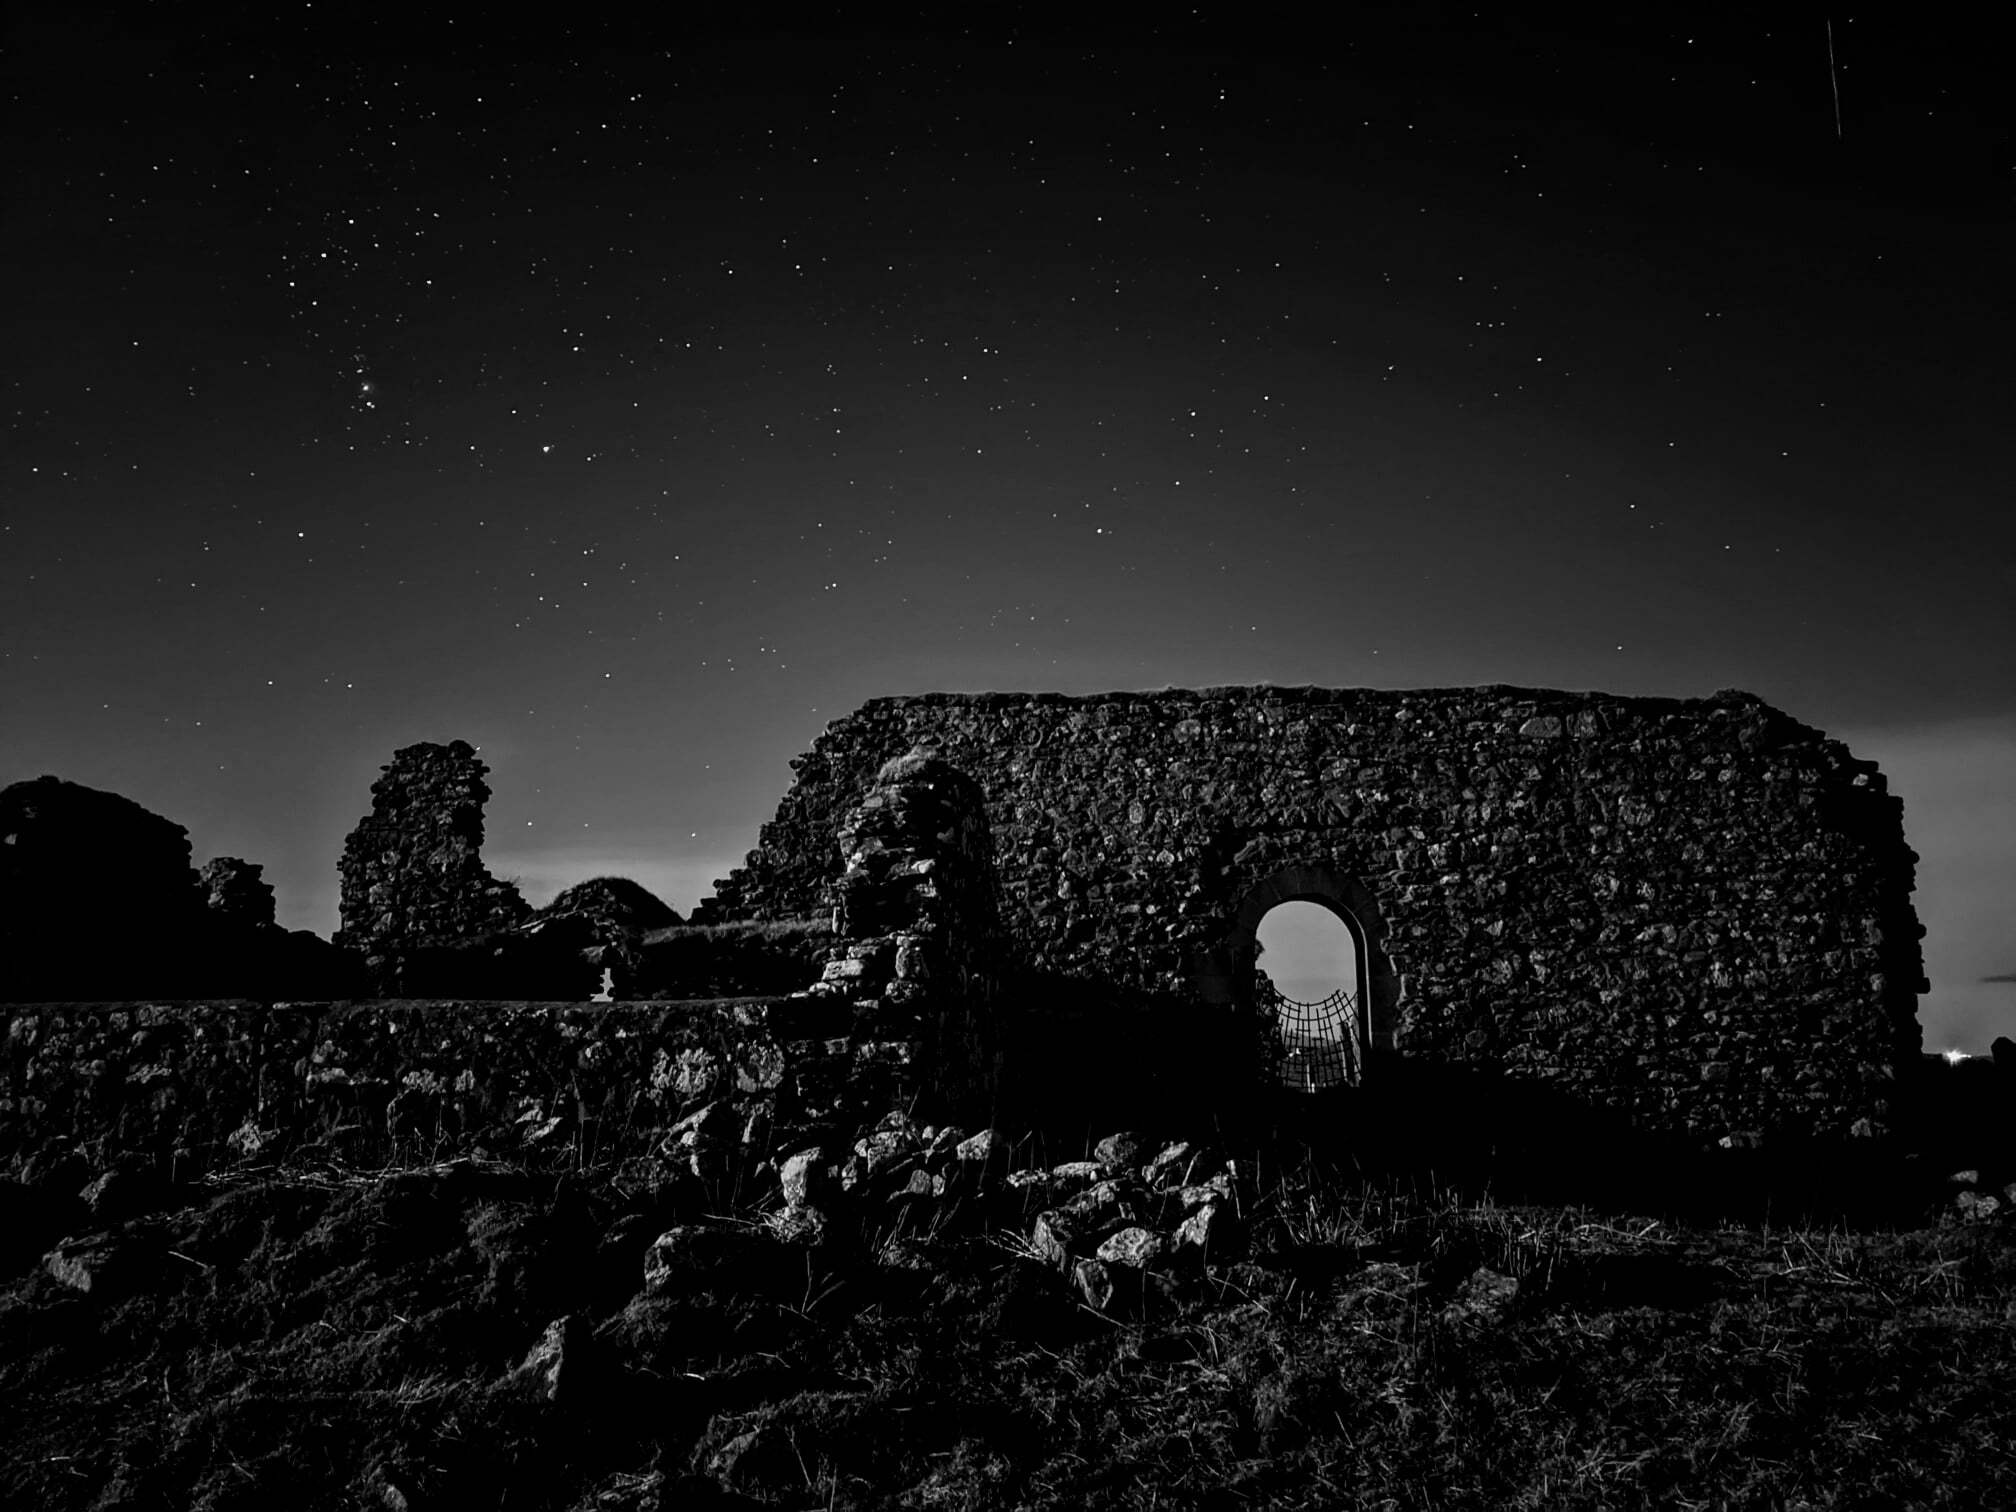 Night sky photography on Uist featuring a delapidated stone building